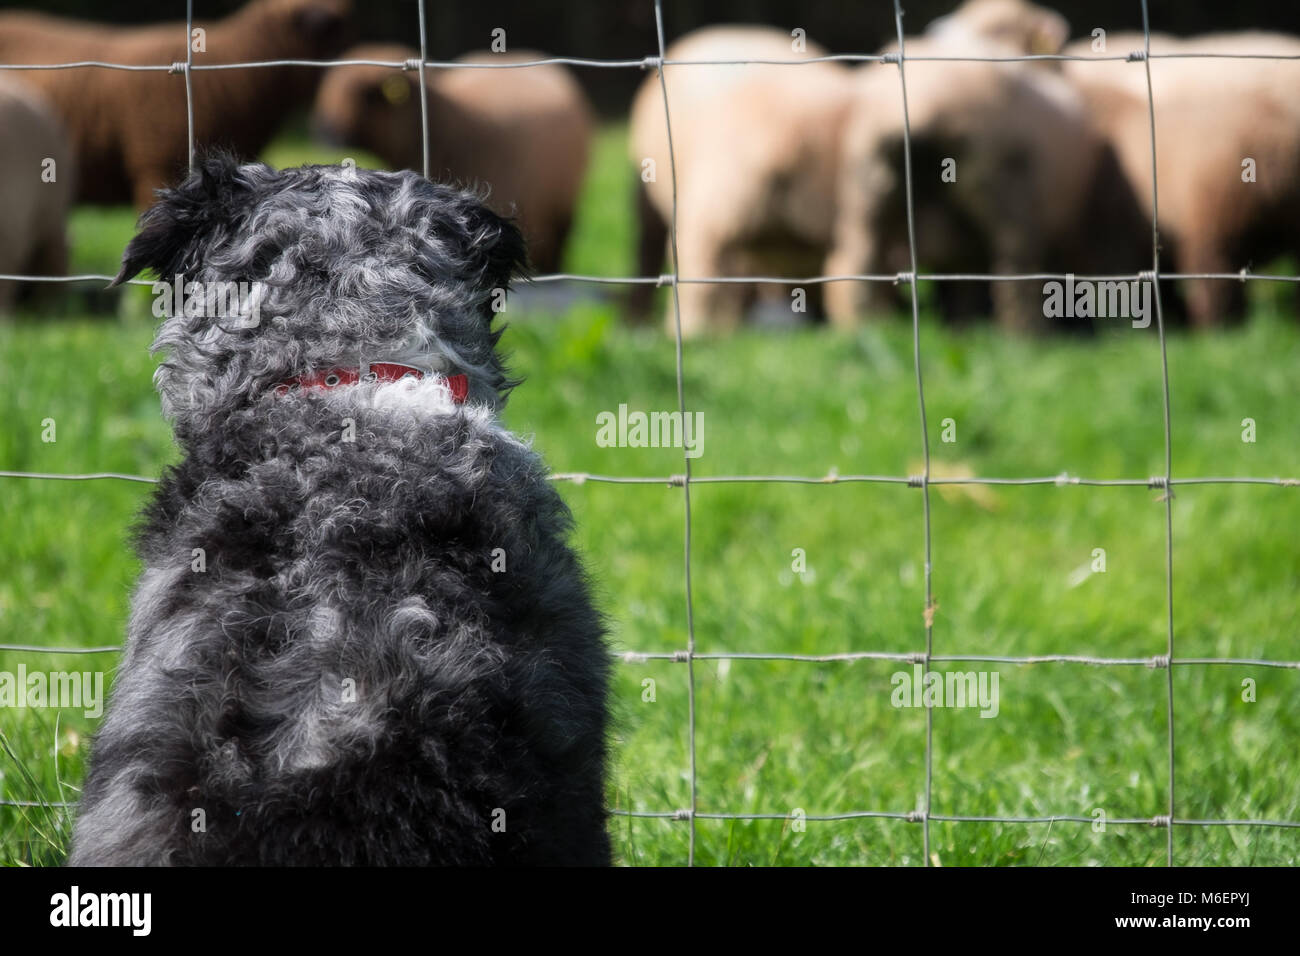 Sheepdog watching sheep from behind wire fence Stock Photo